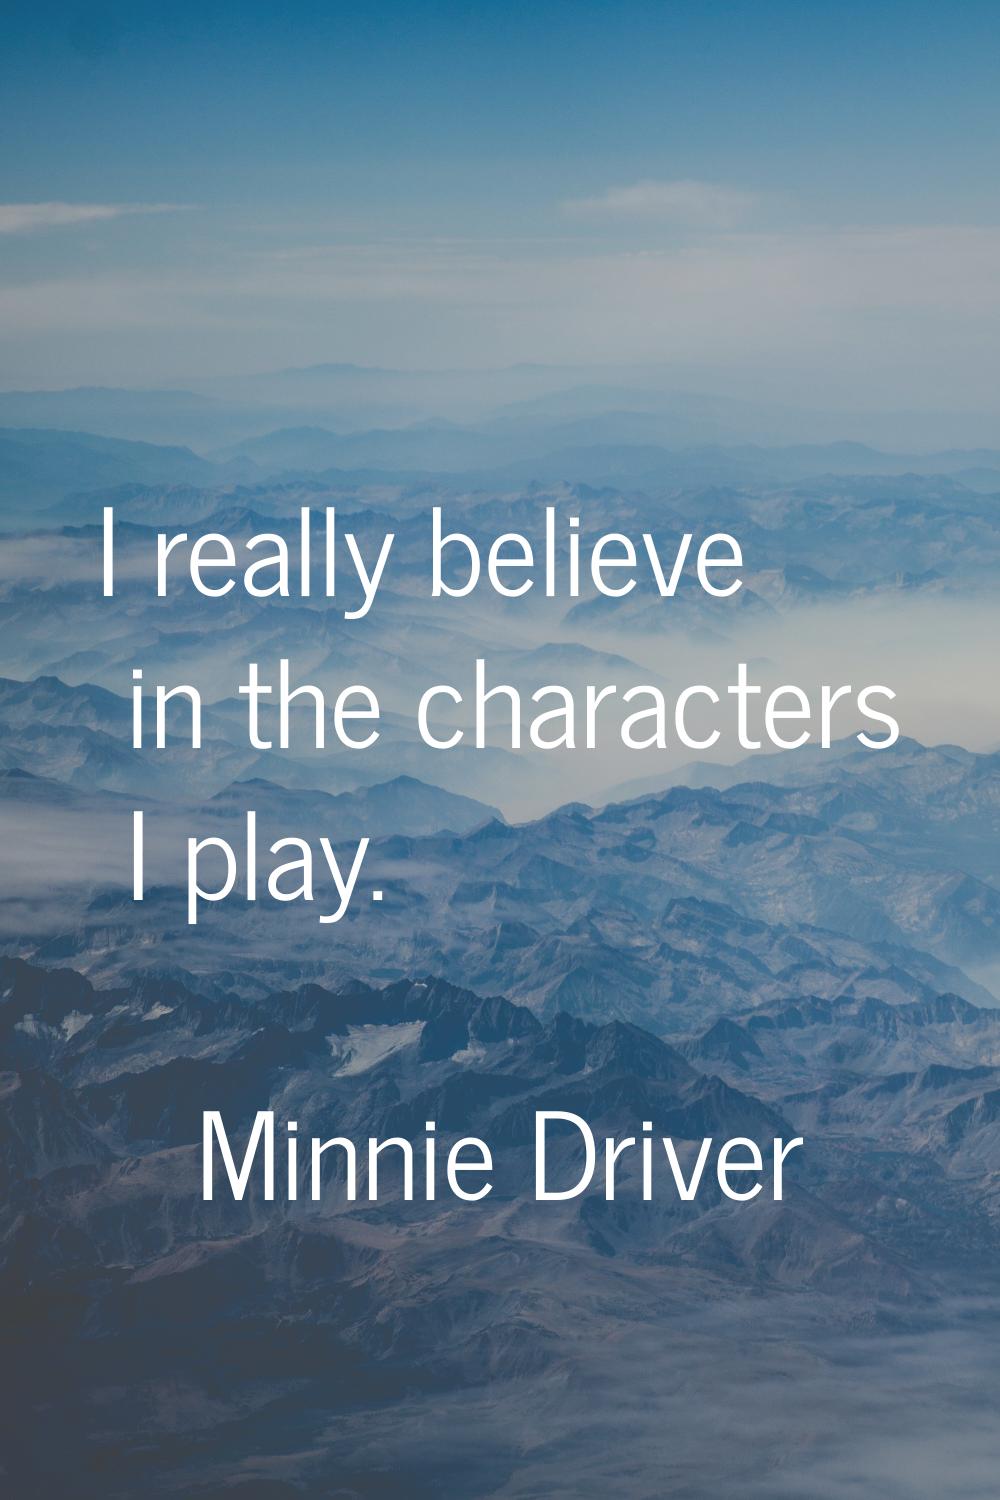 I really believe in the characters I play.